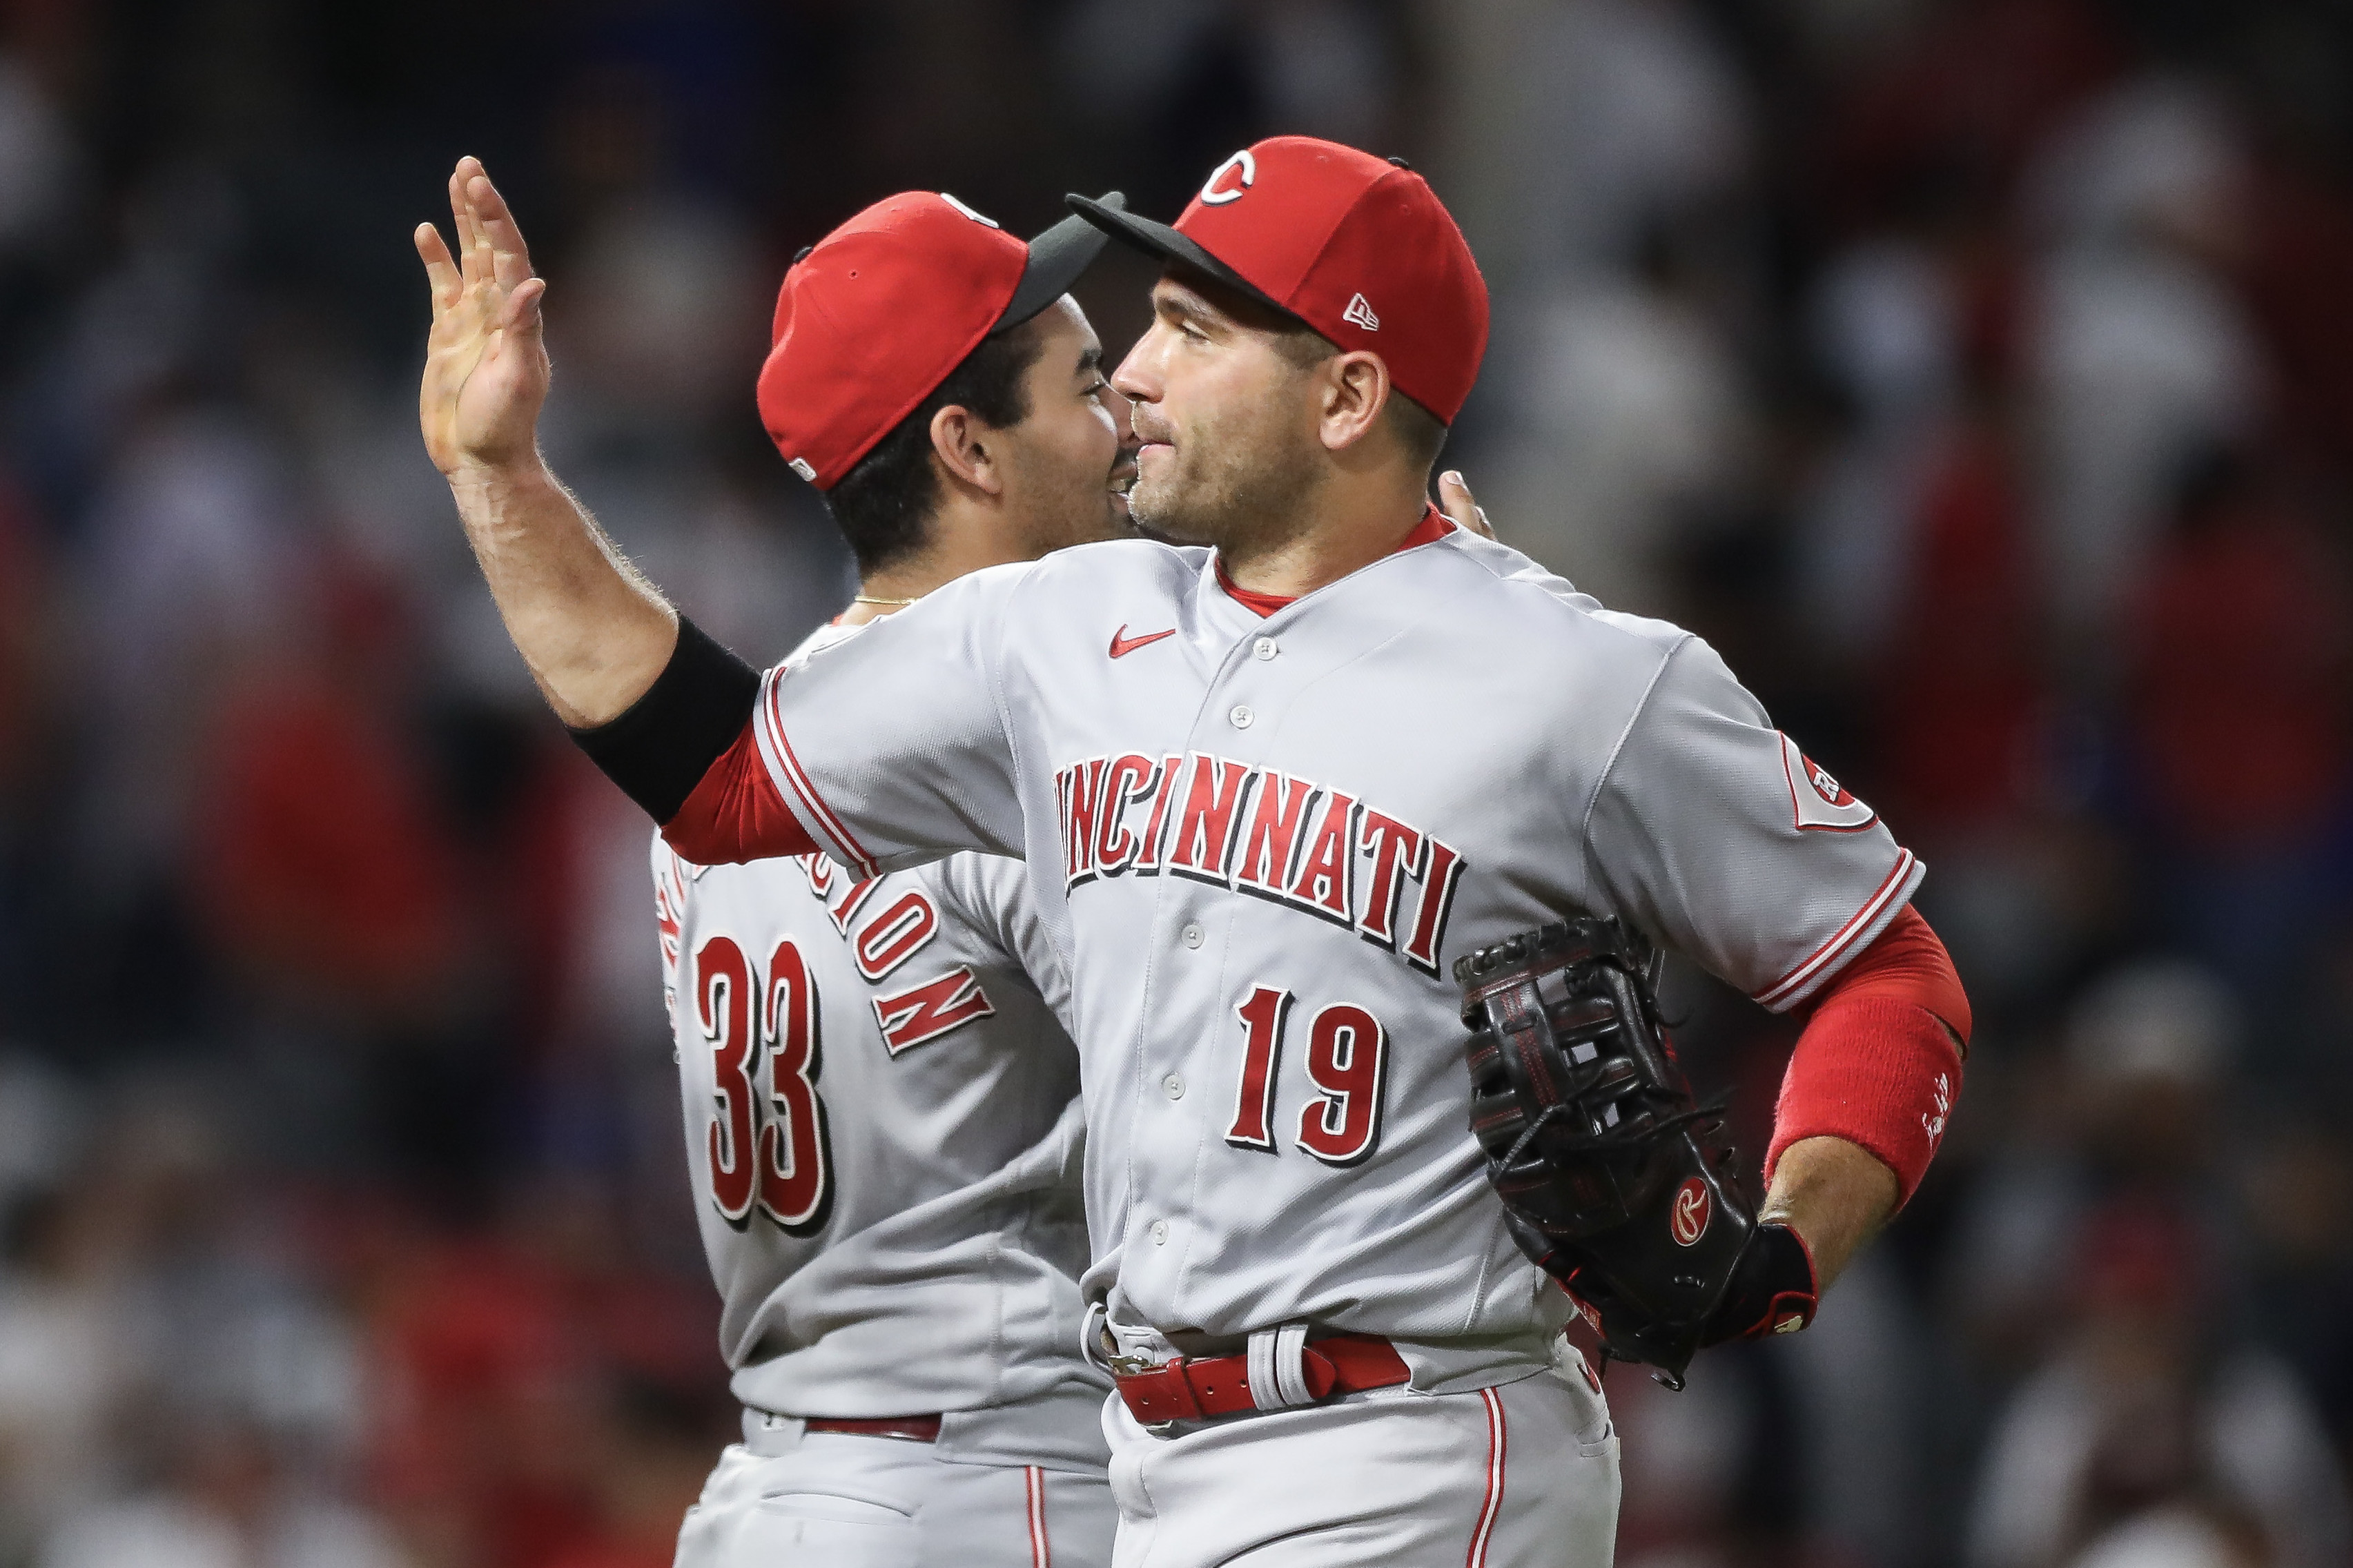 Bobby Nightengale on X: Joey Votto wearing a #Reds pride hat in